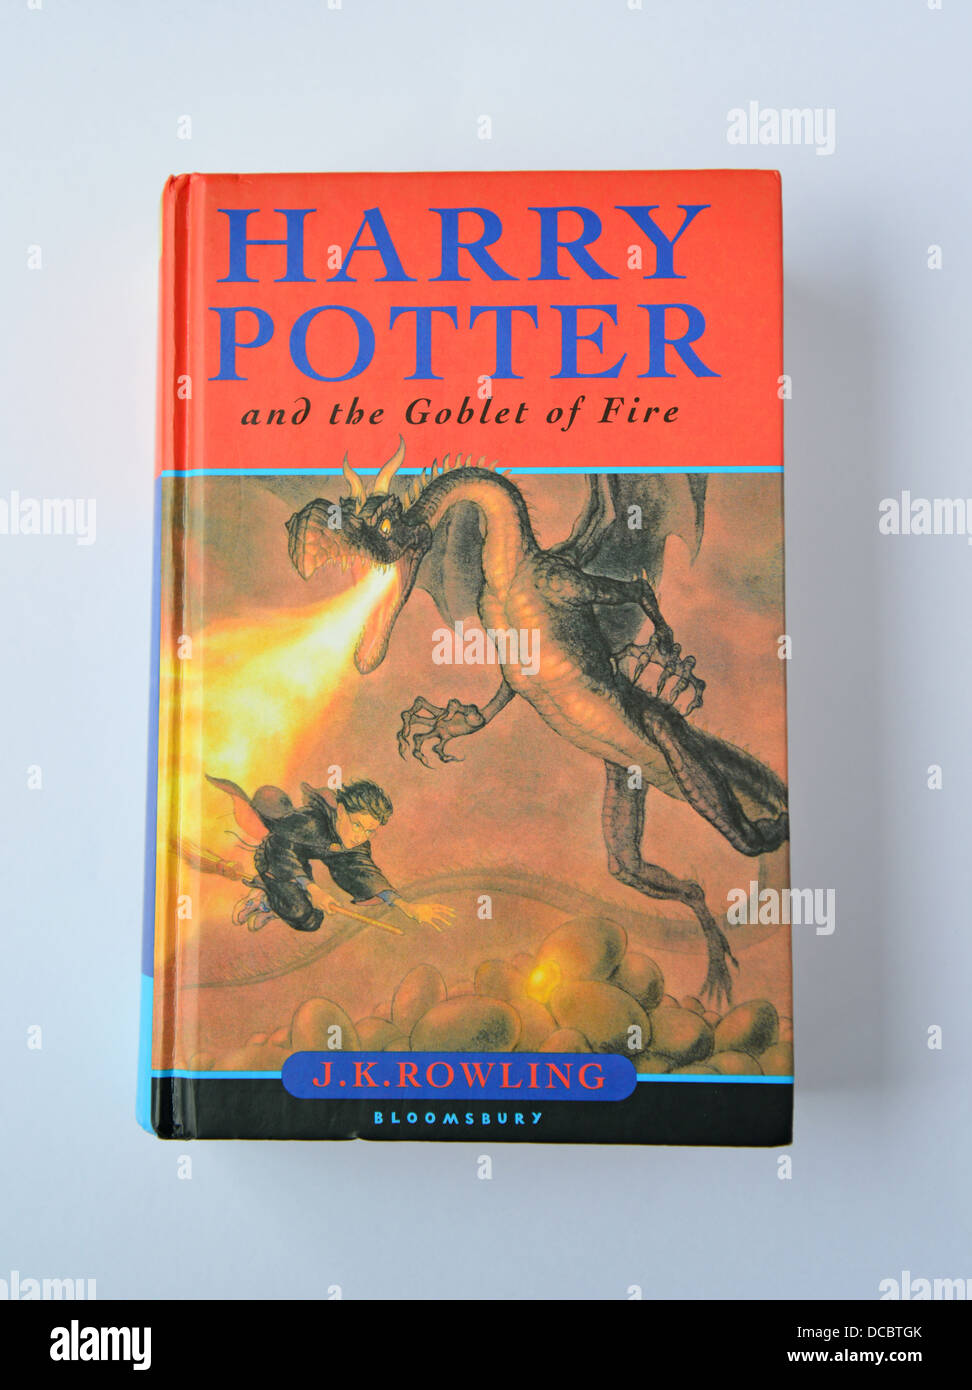 J.K.Rowling's 'Harry Potter and the Goblet of Fire' book, Surrey, England, United Kingdom Stock Photo